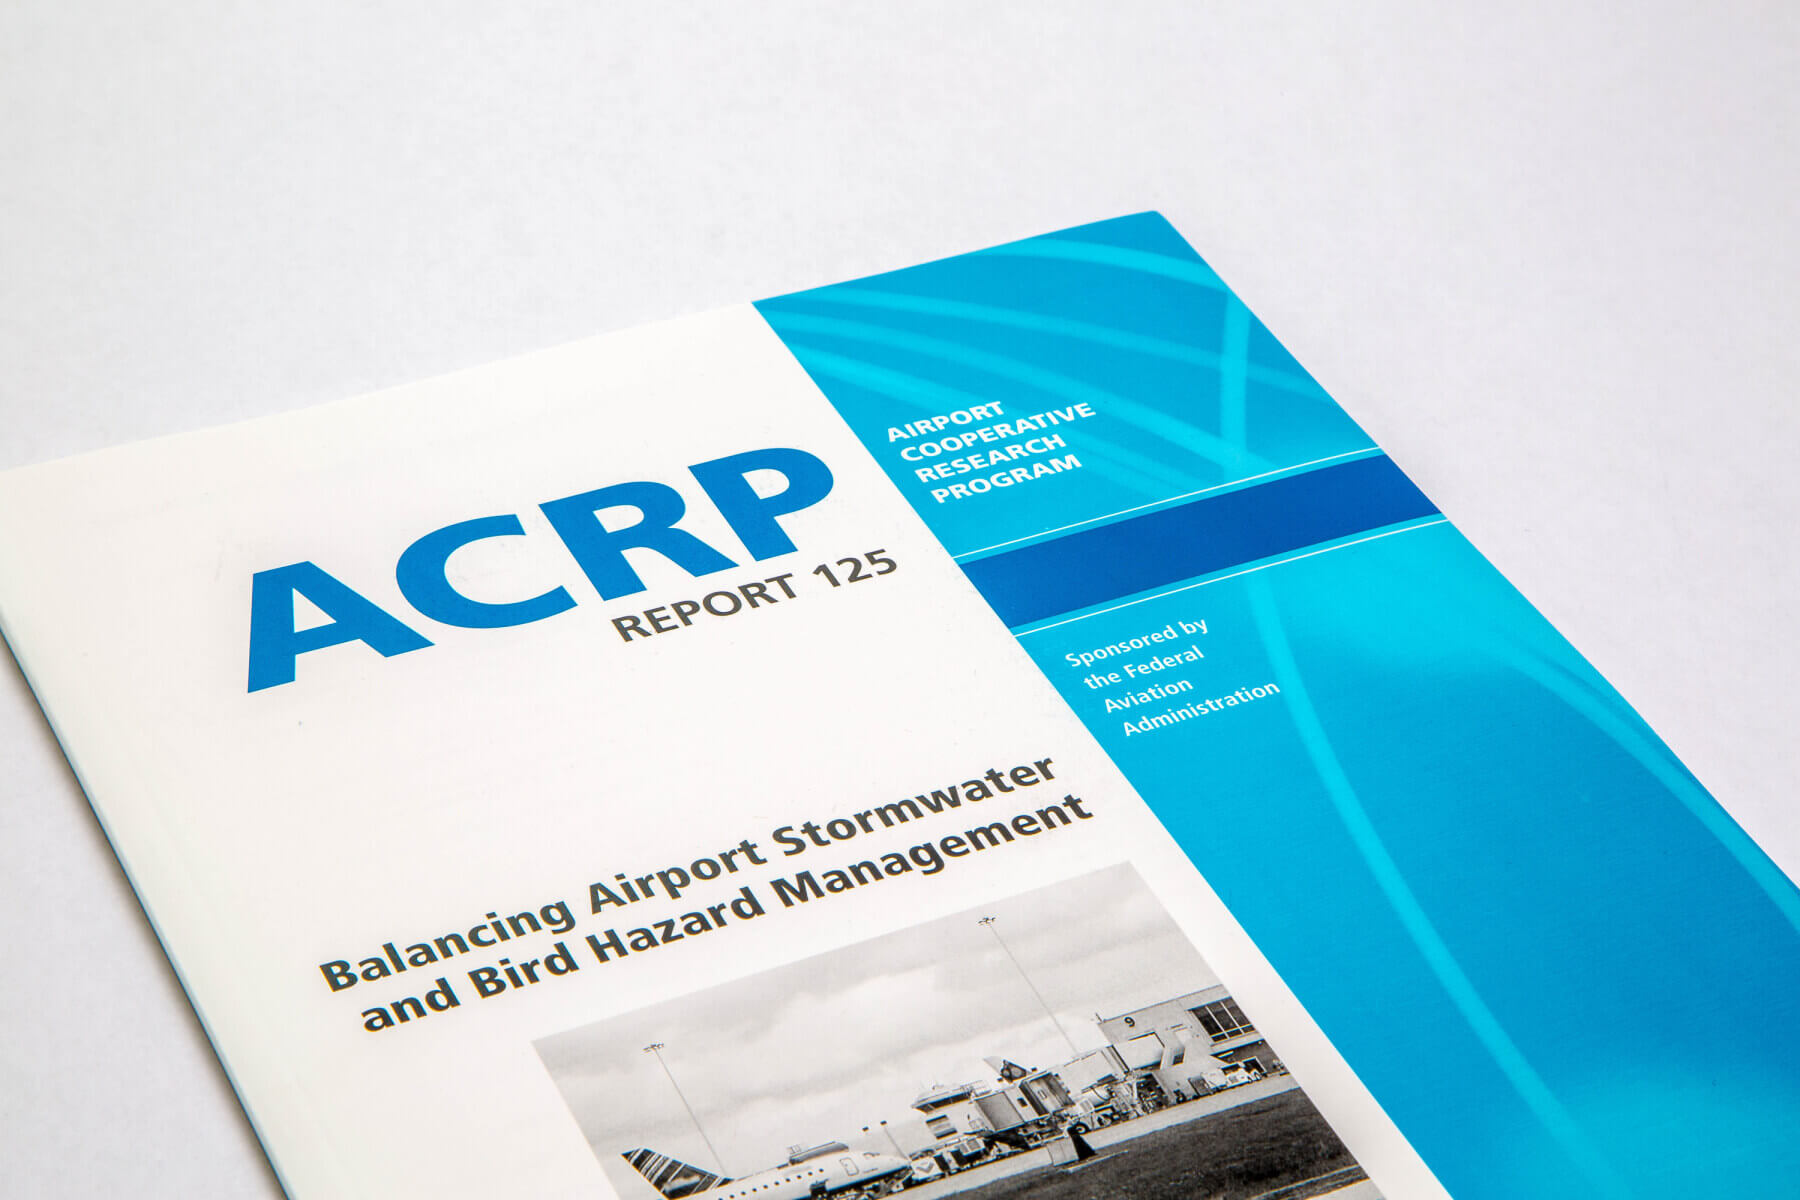 a close up of the cover of ACRP research report 125